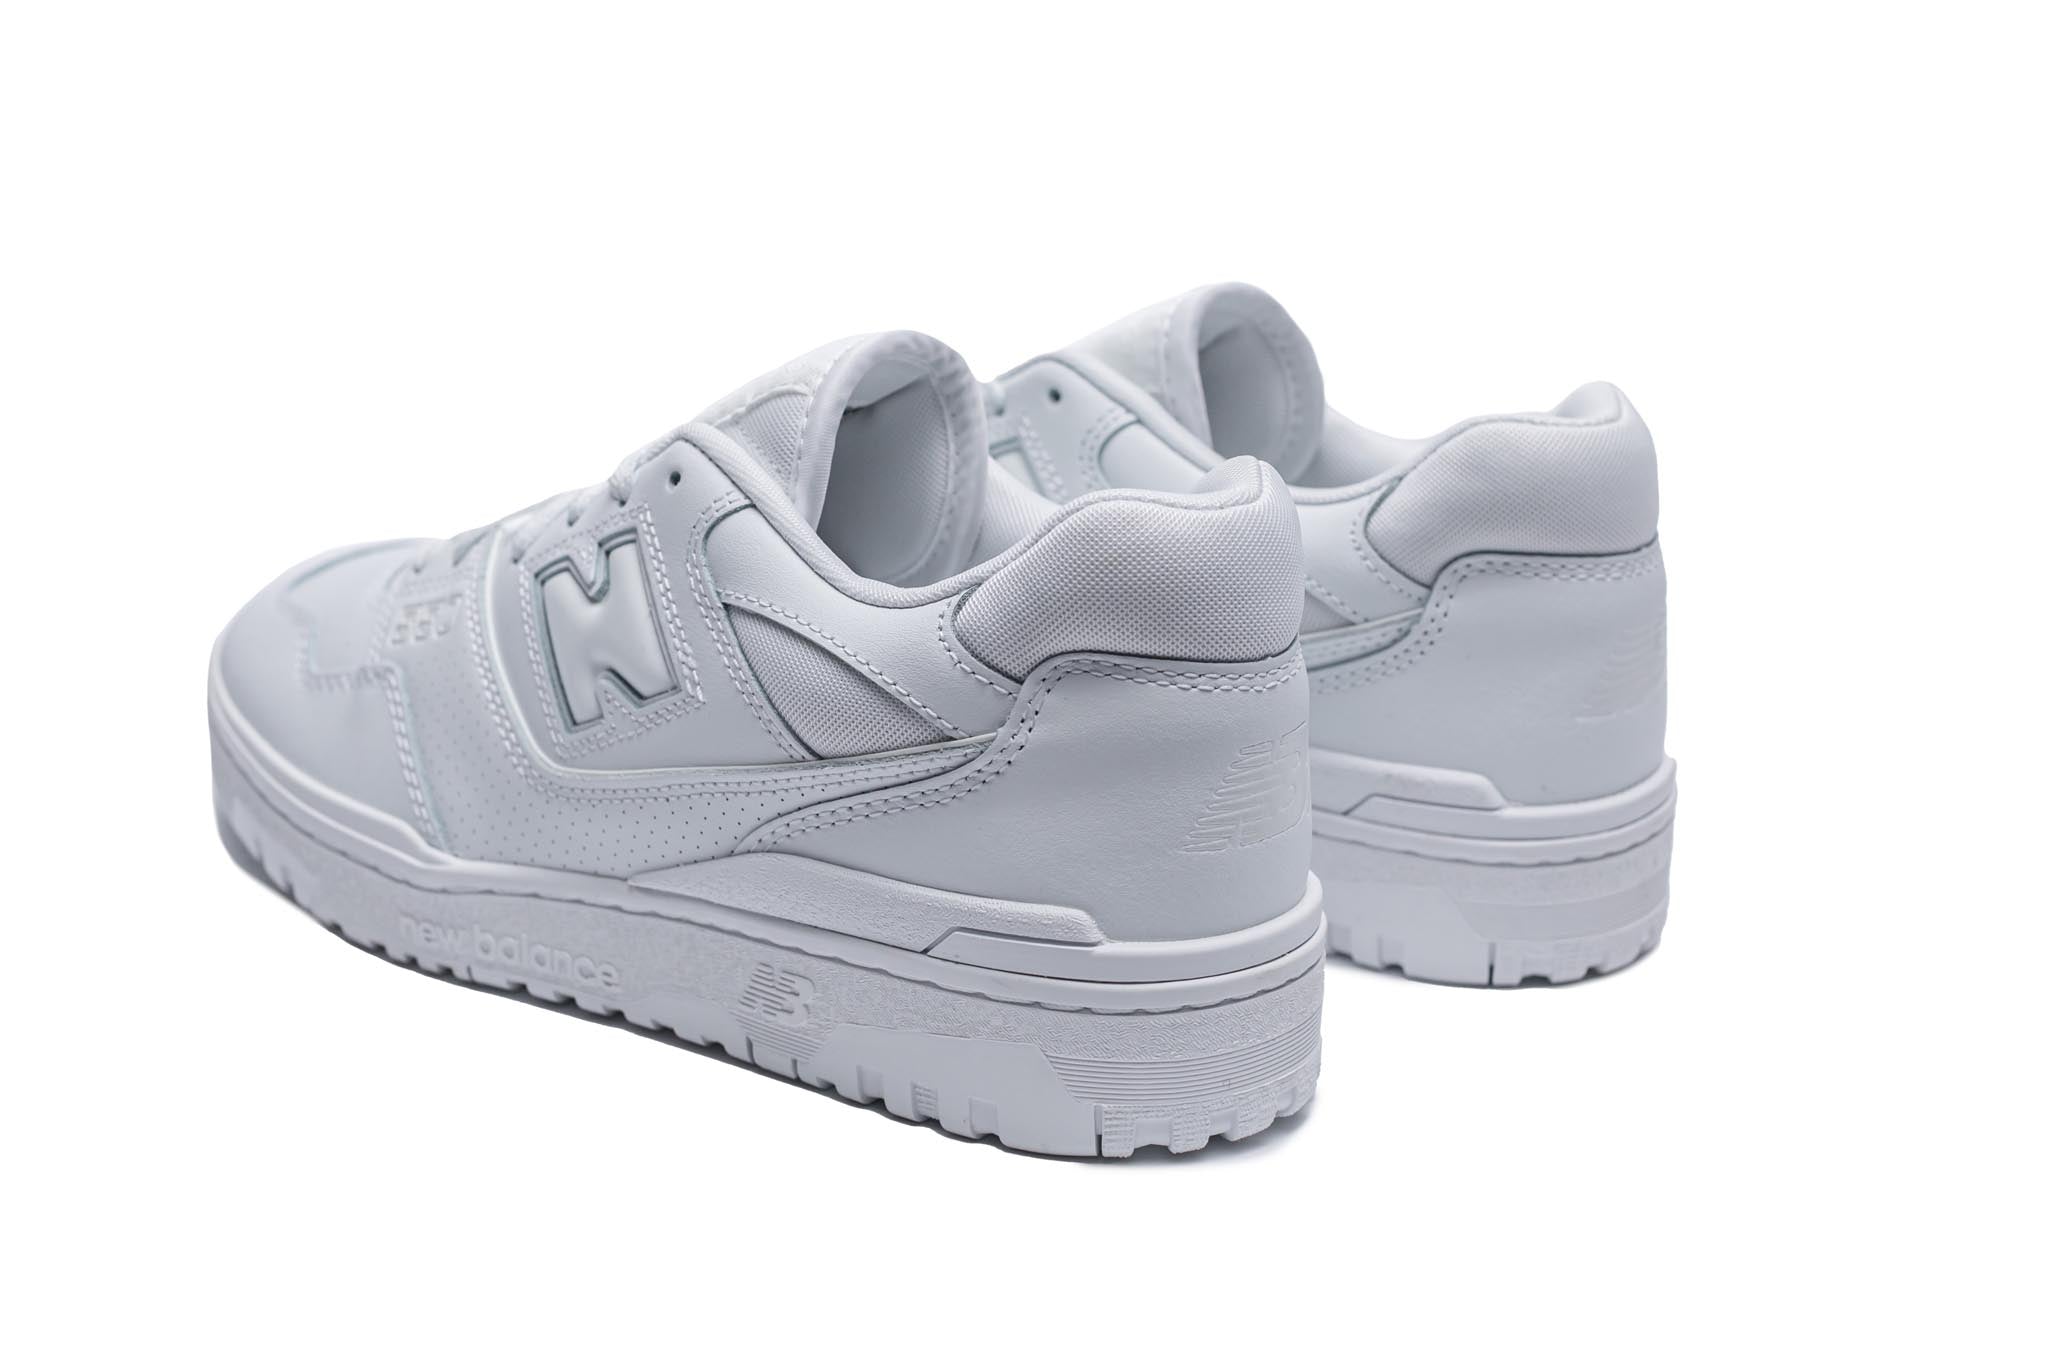 New Balance 550 sneakers in triple white